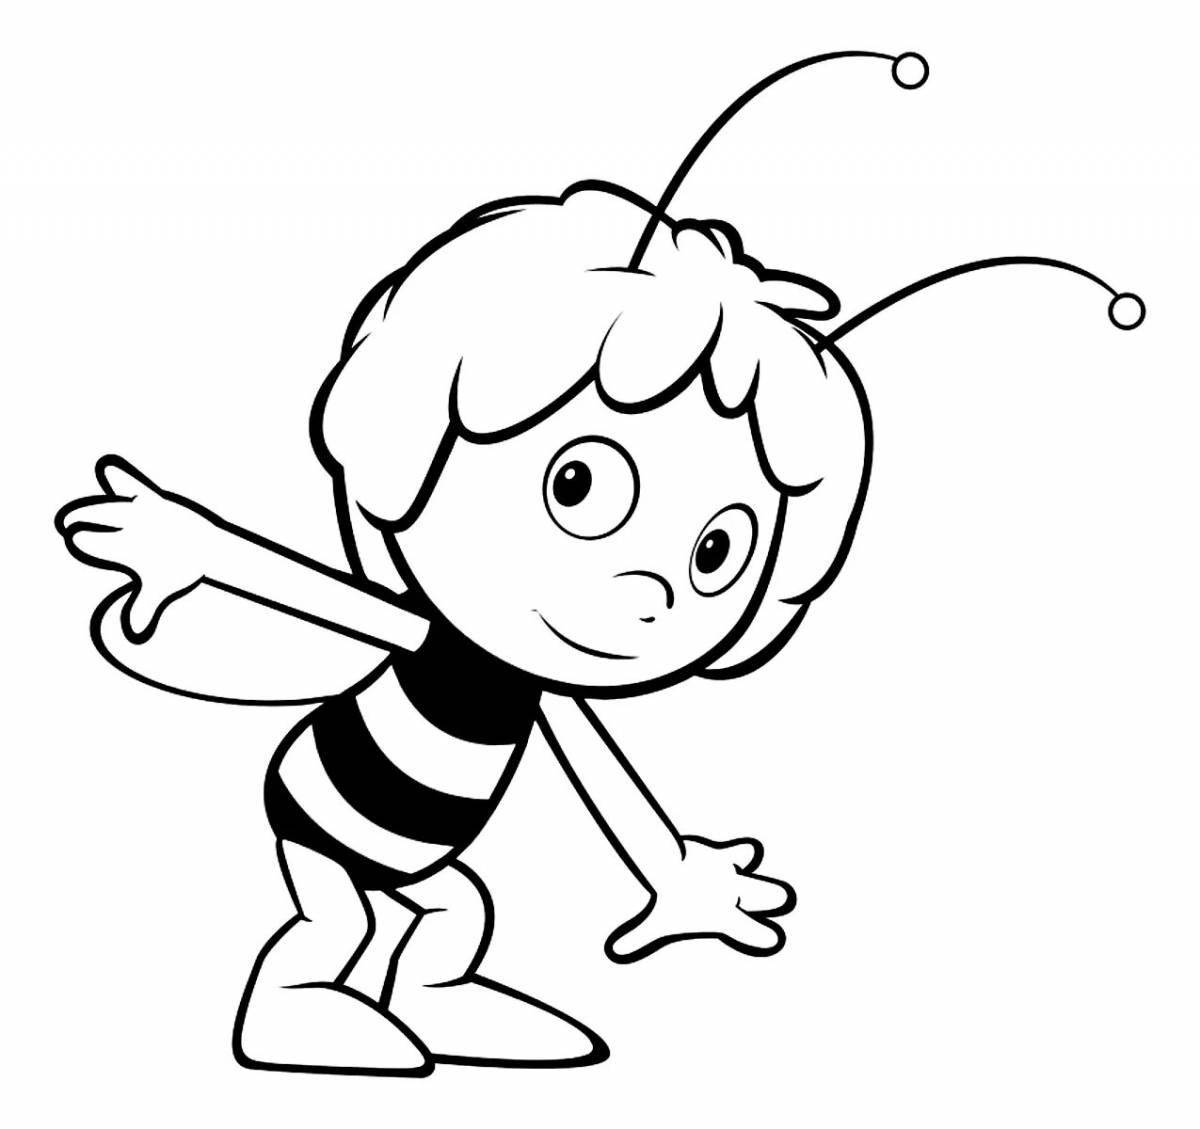 Maya bee playful coloring page for kids